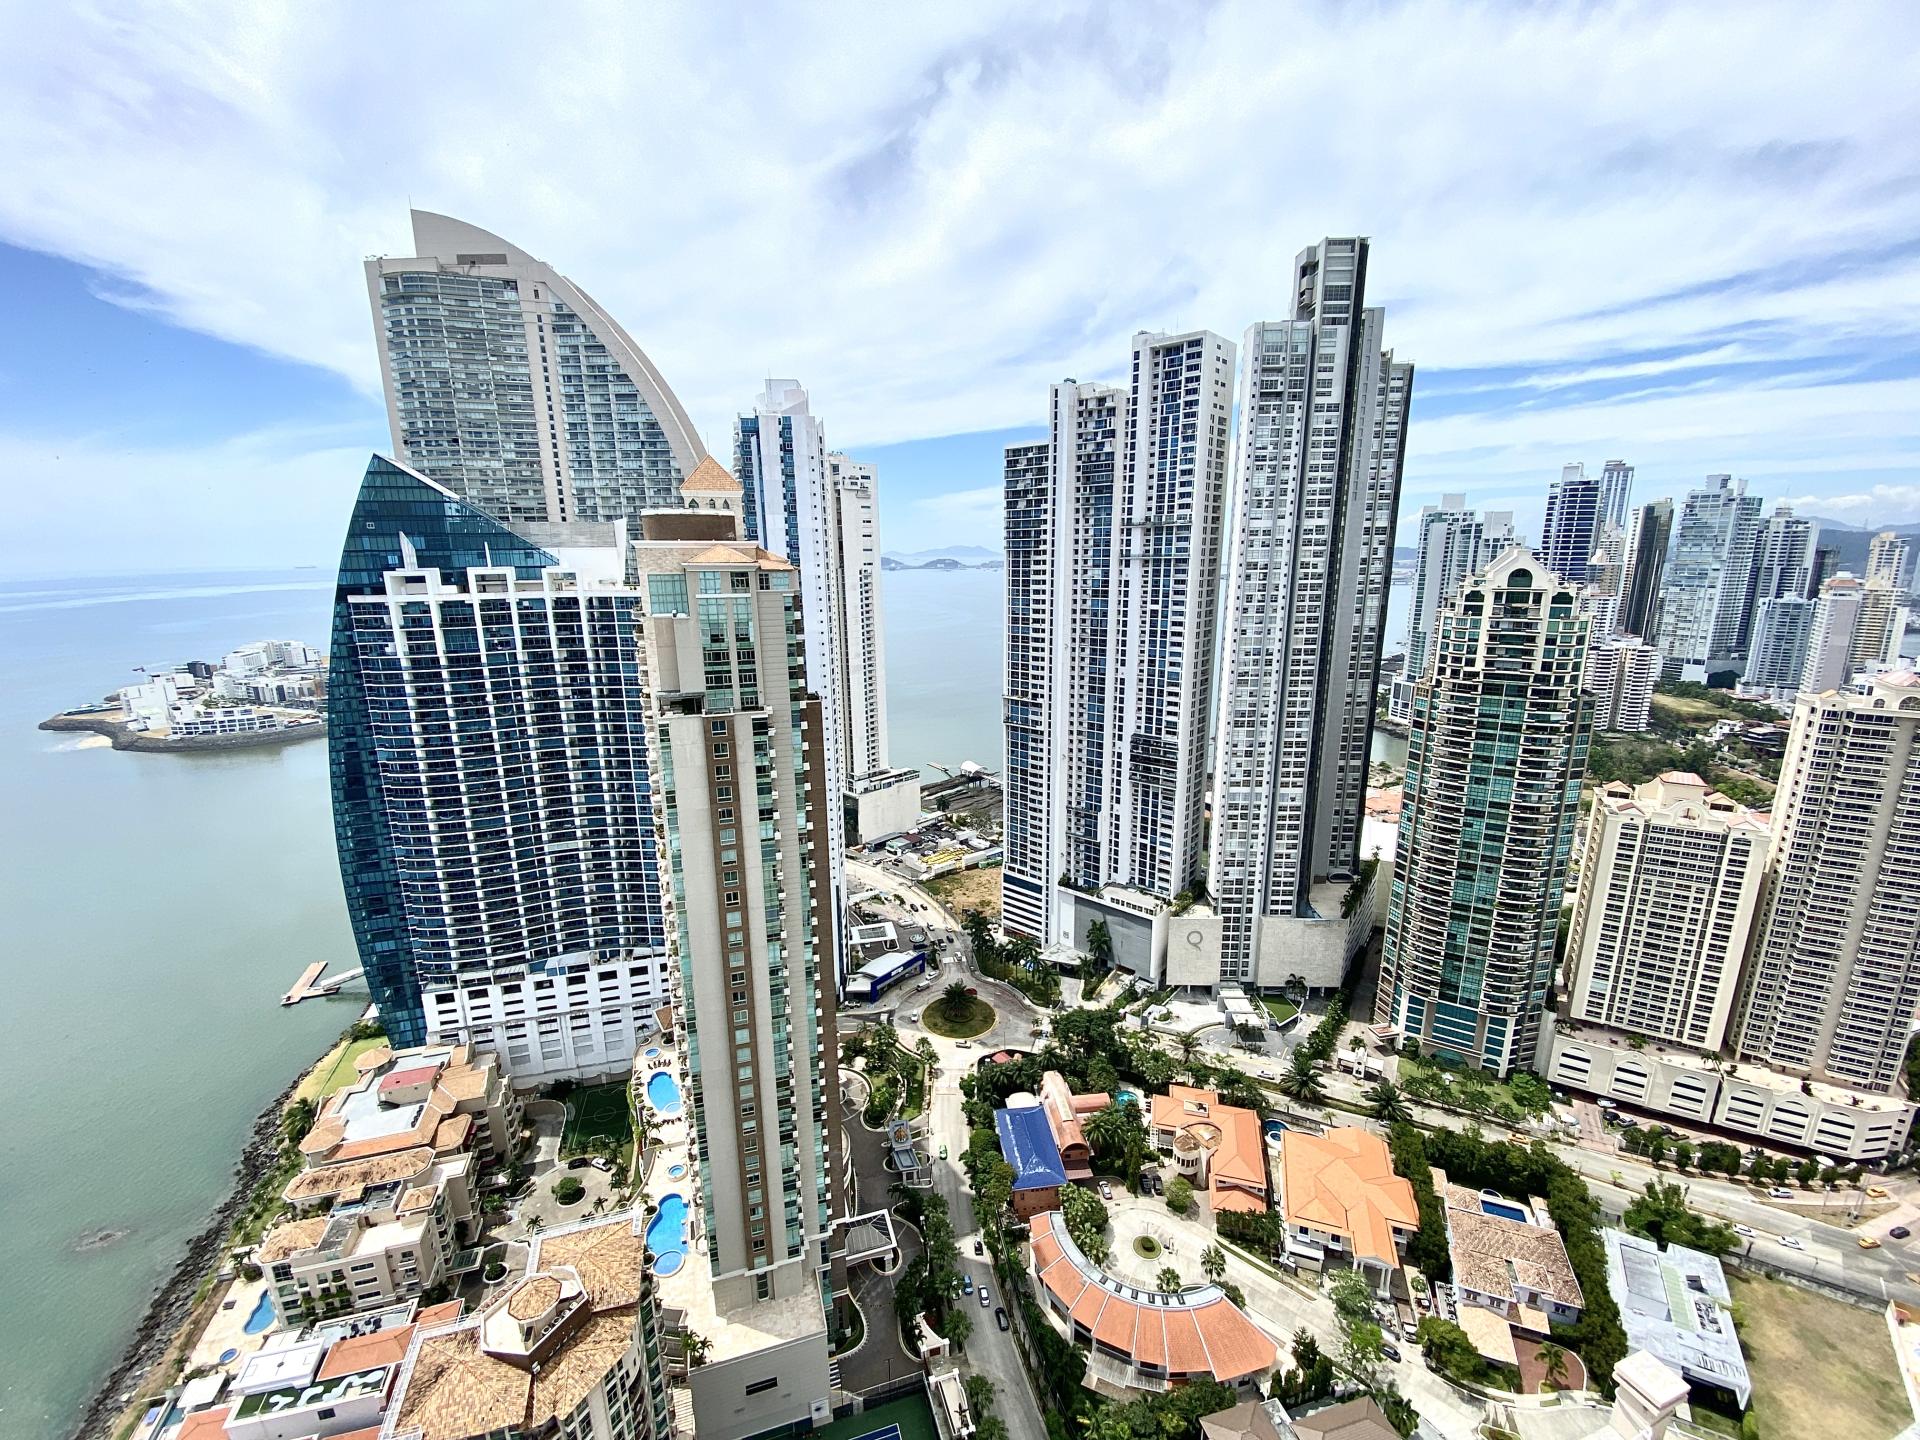 Penthouse,  Pacific Point 200, Punta Pacífica